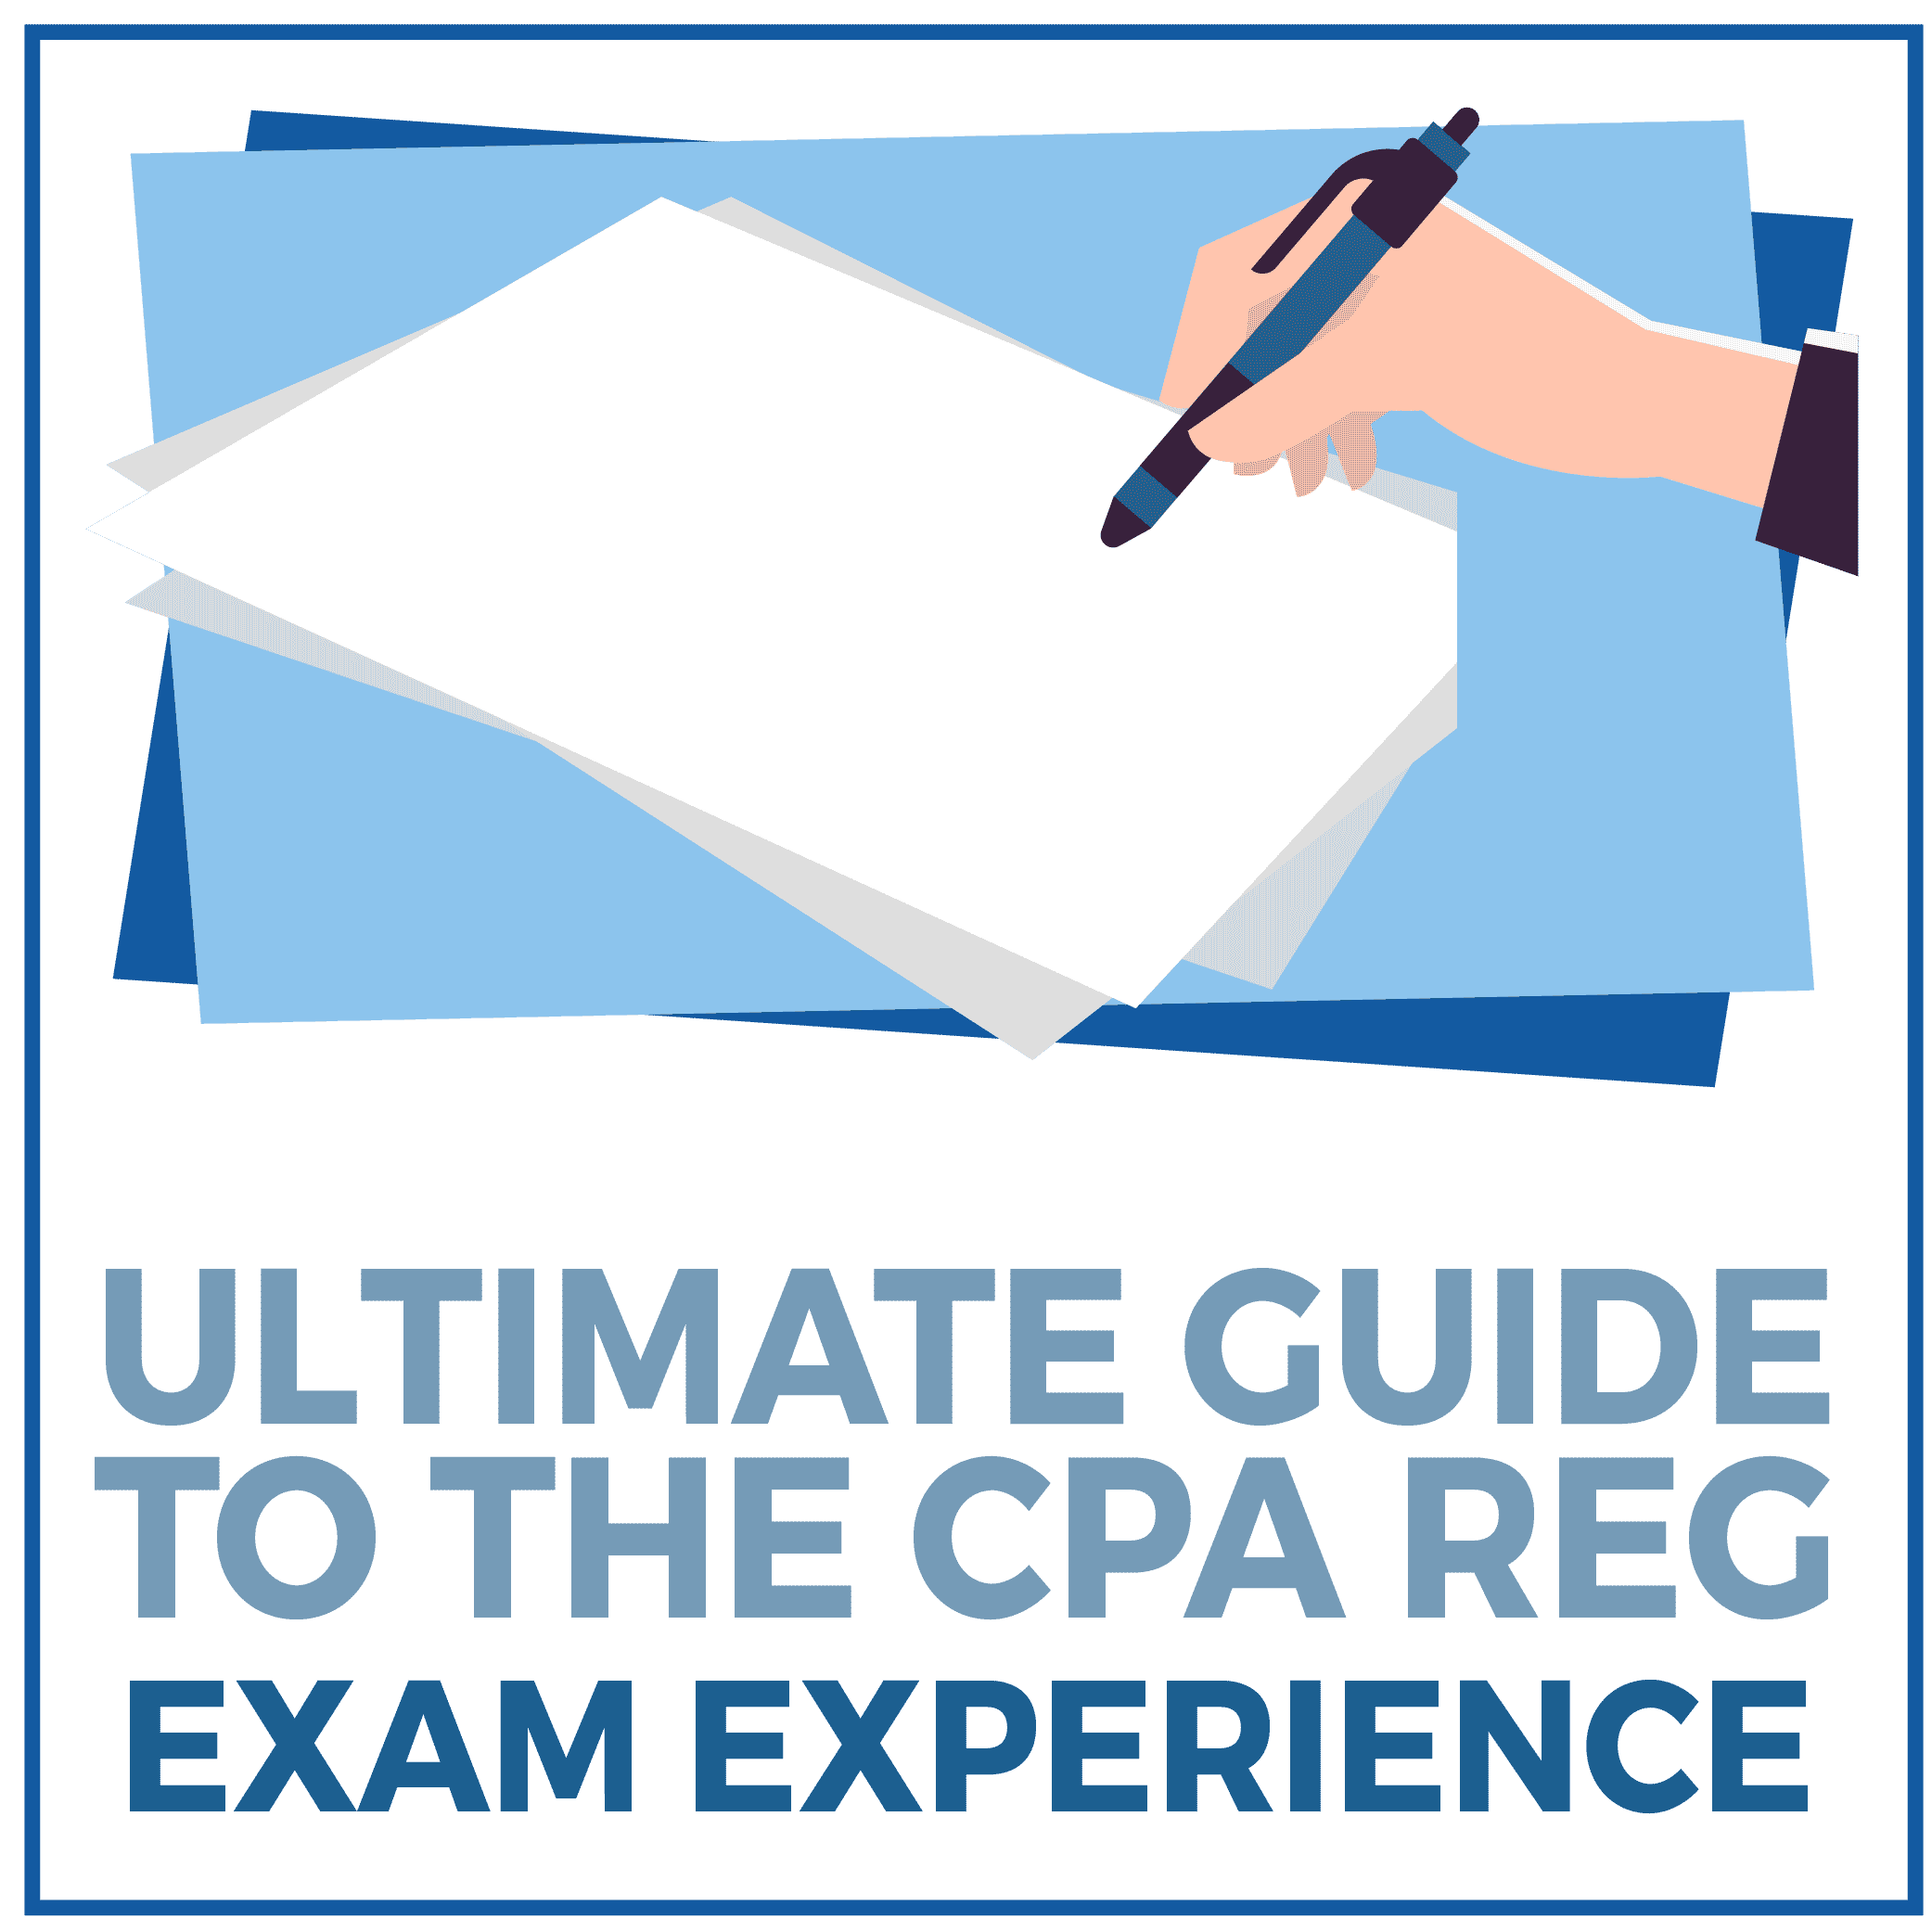 Ultimate Guide to the CPA REG Exam Experience